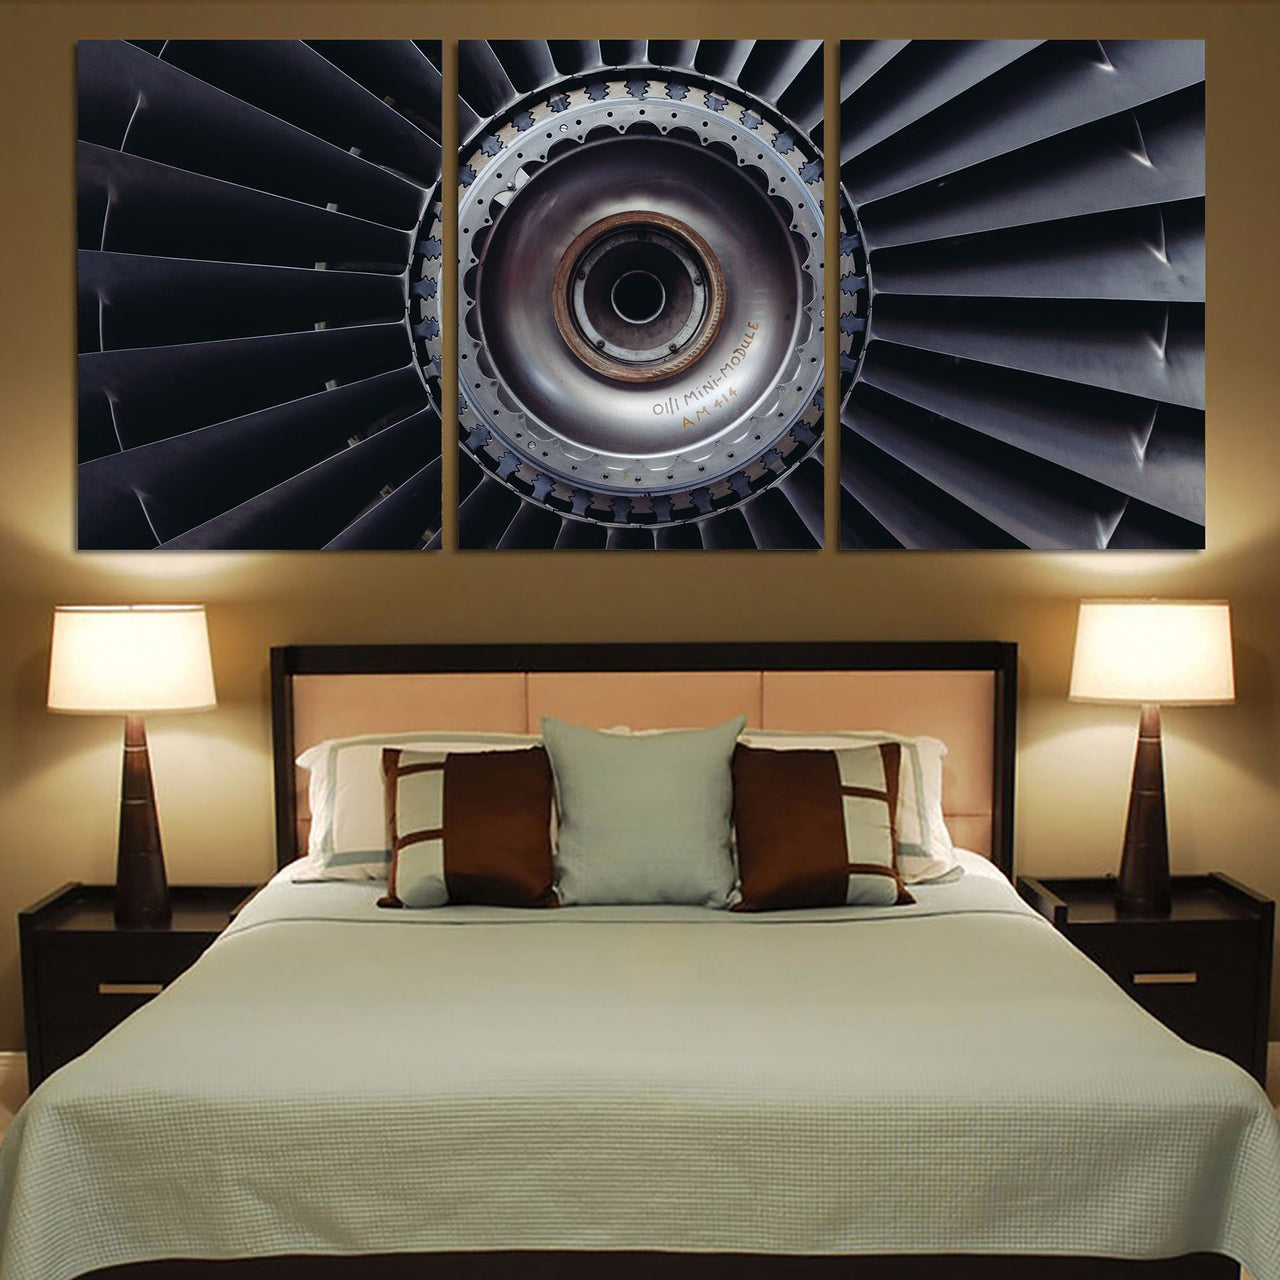 Real Jet Engine Printed Canvas Posters (3 Pieces) Aviation Shop 